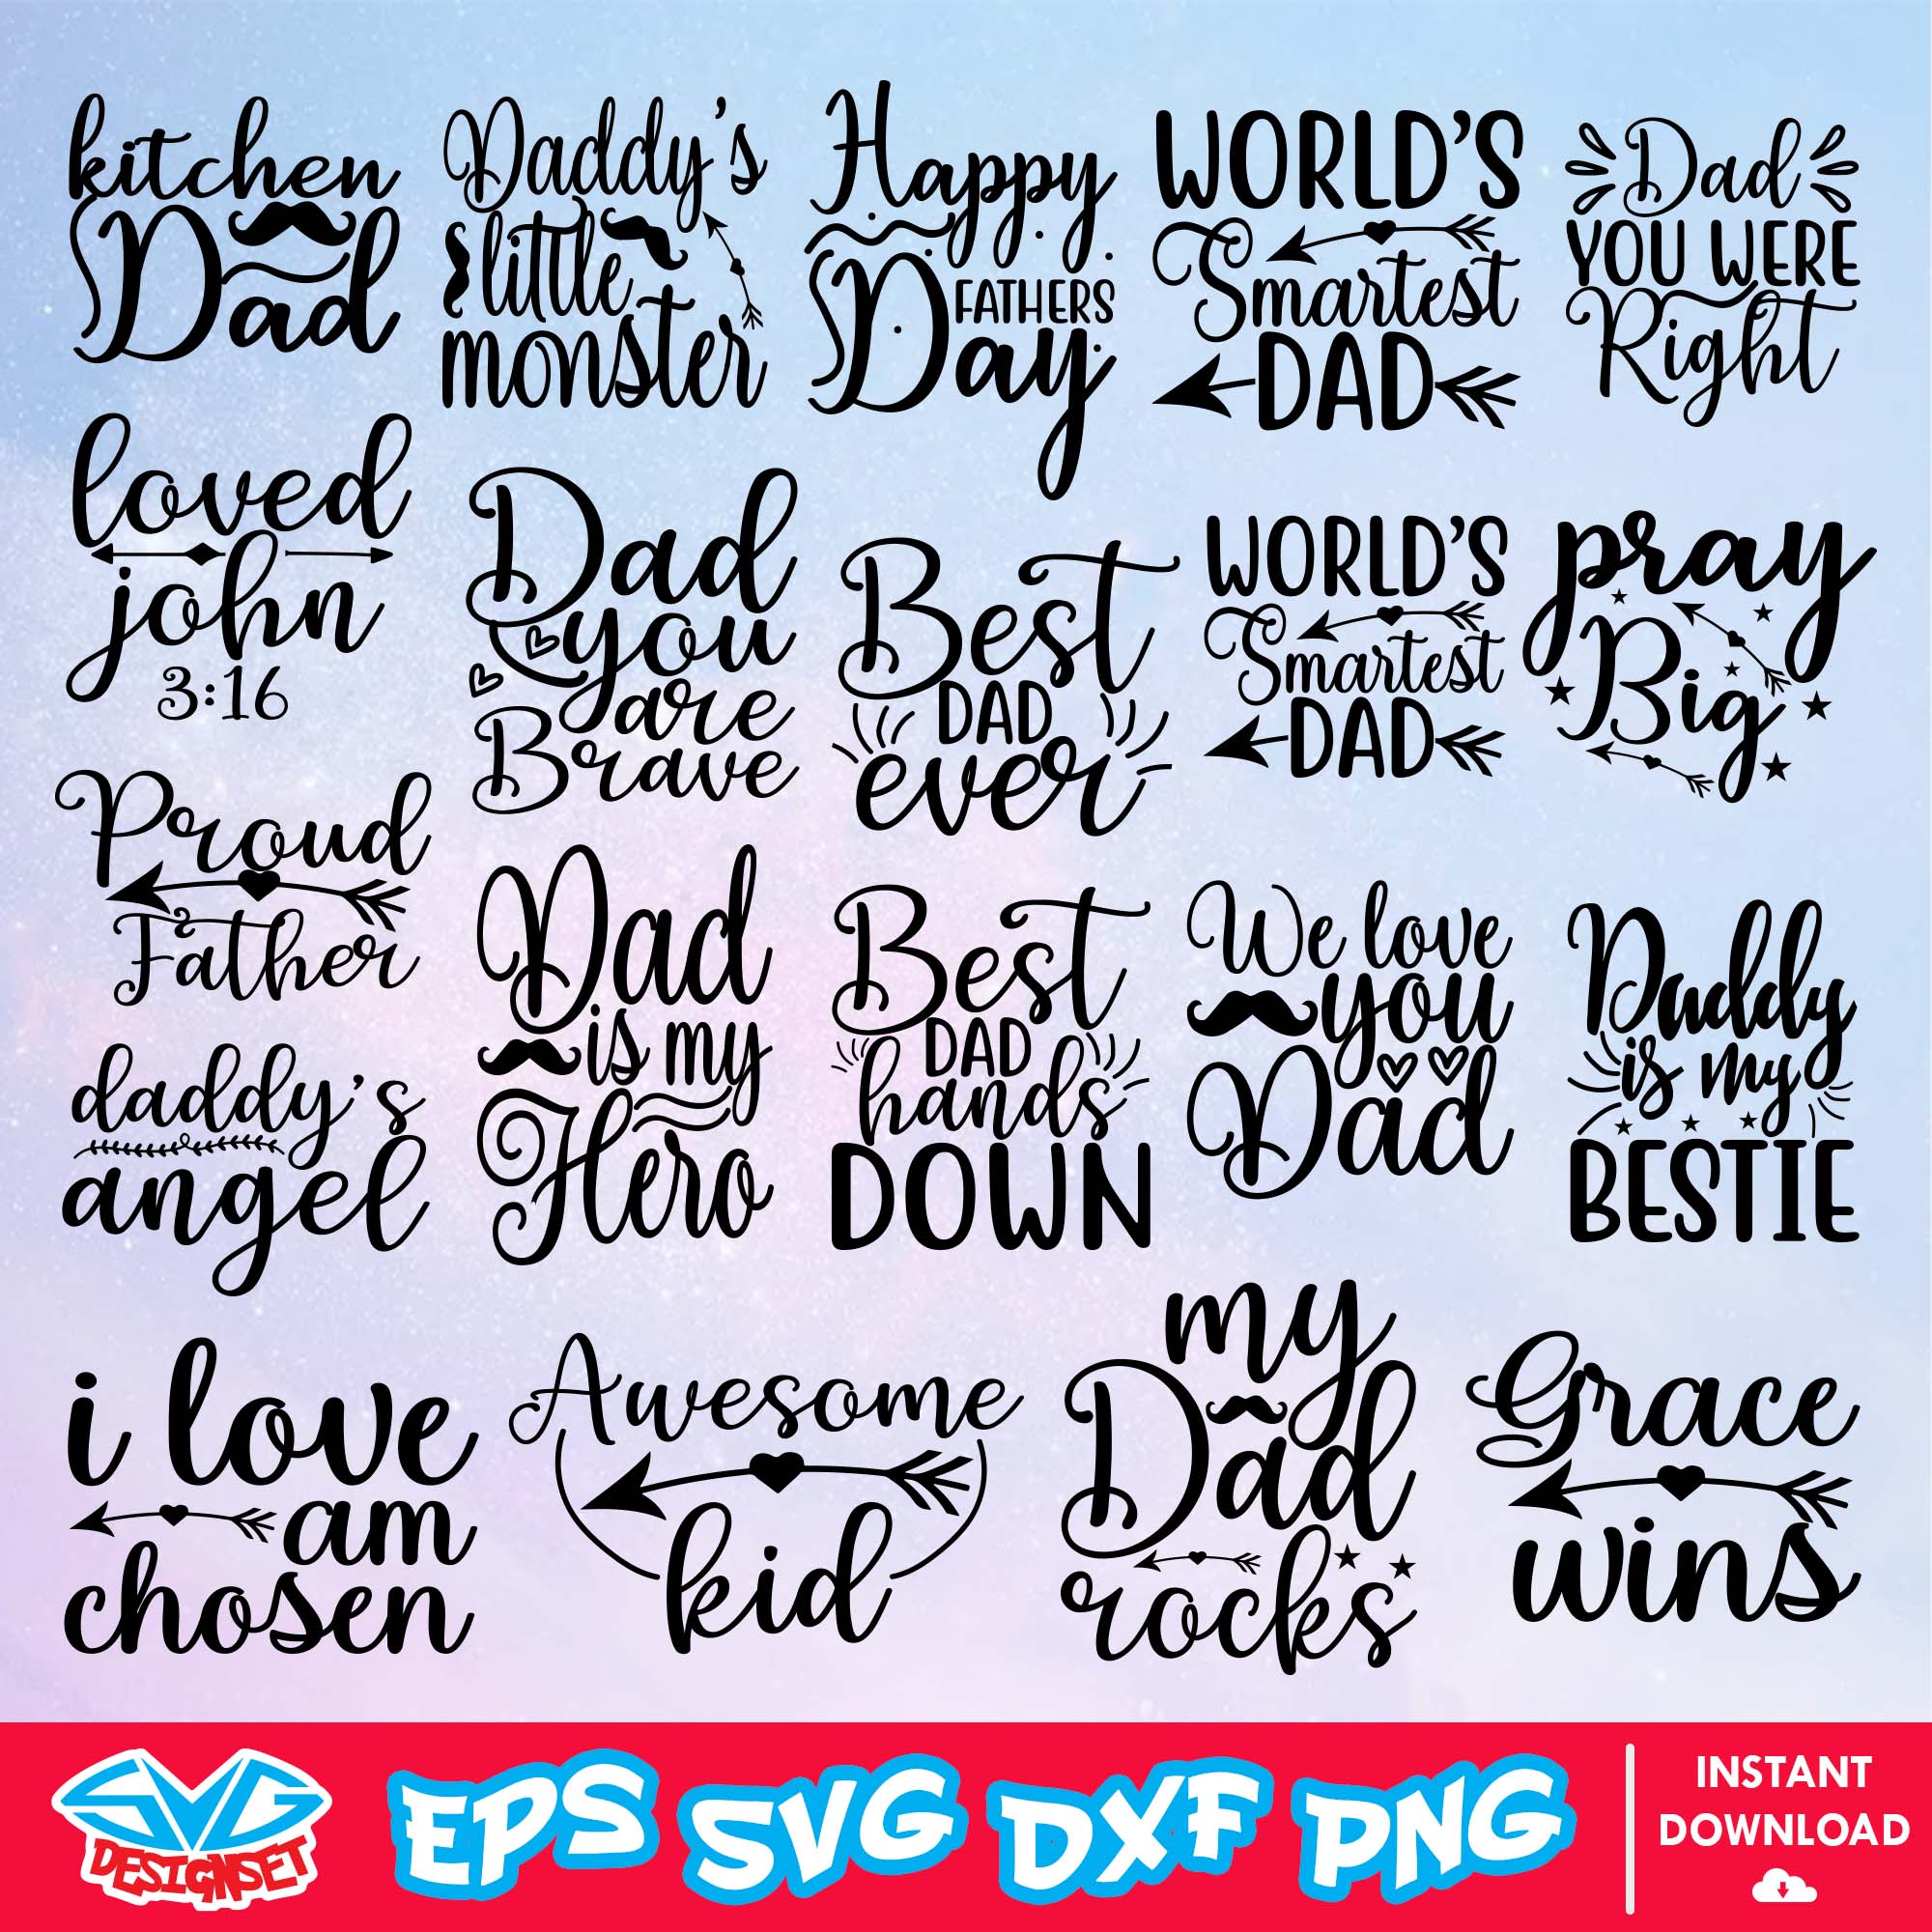 Happy Father's Day Bundle Svg, Dxf, Eps, Png, Clipart, Silhouette and Cut files for Cricut & Silhouette Cameo 1 - SVGDesignSet